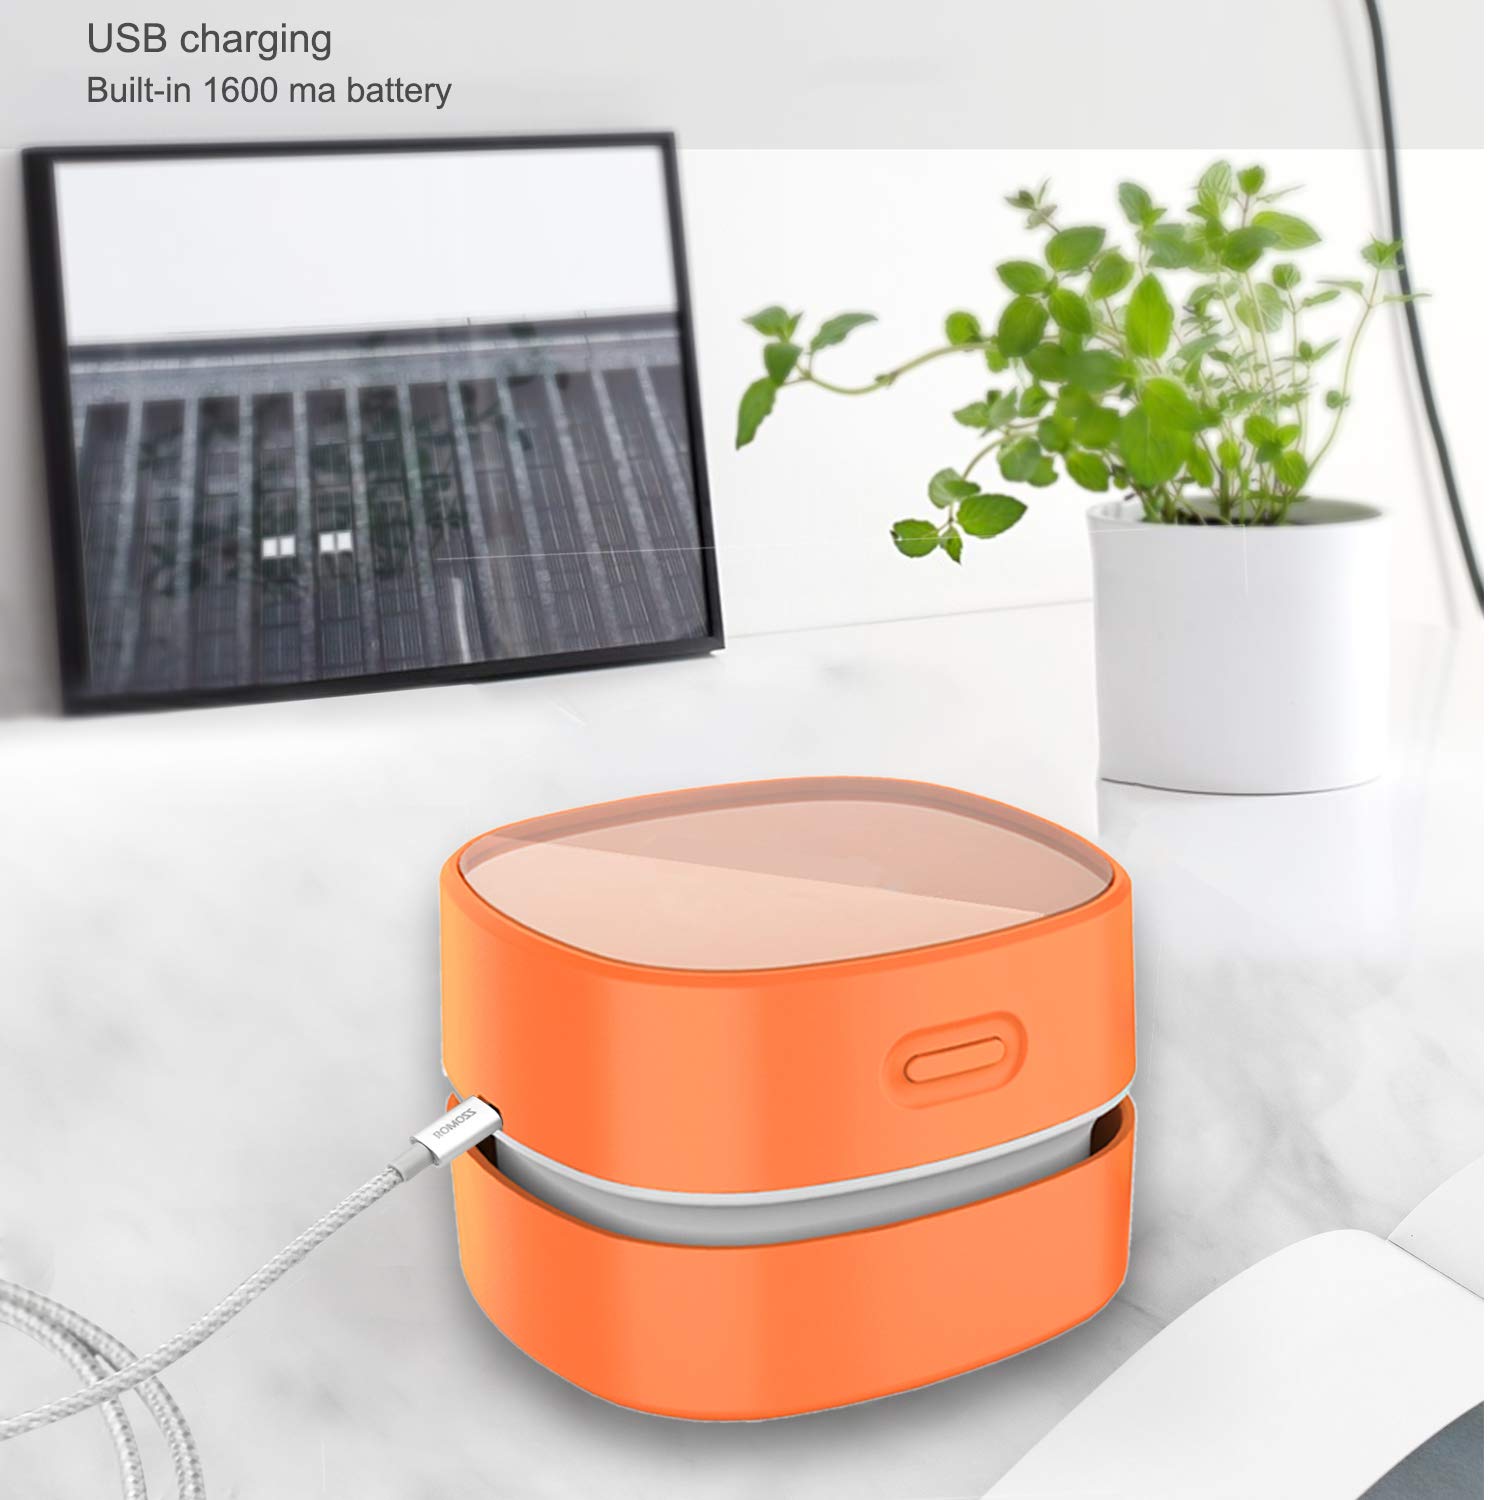 ODISTAR Desktop Vacuum cleaner,Mini table dust sweeper Energy Saving with auto power-off function,High endurance up to 400 mins,Cordless&360º Rotatable Design for Keyboard/Home/Office(orange charging)